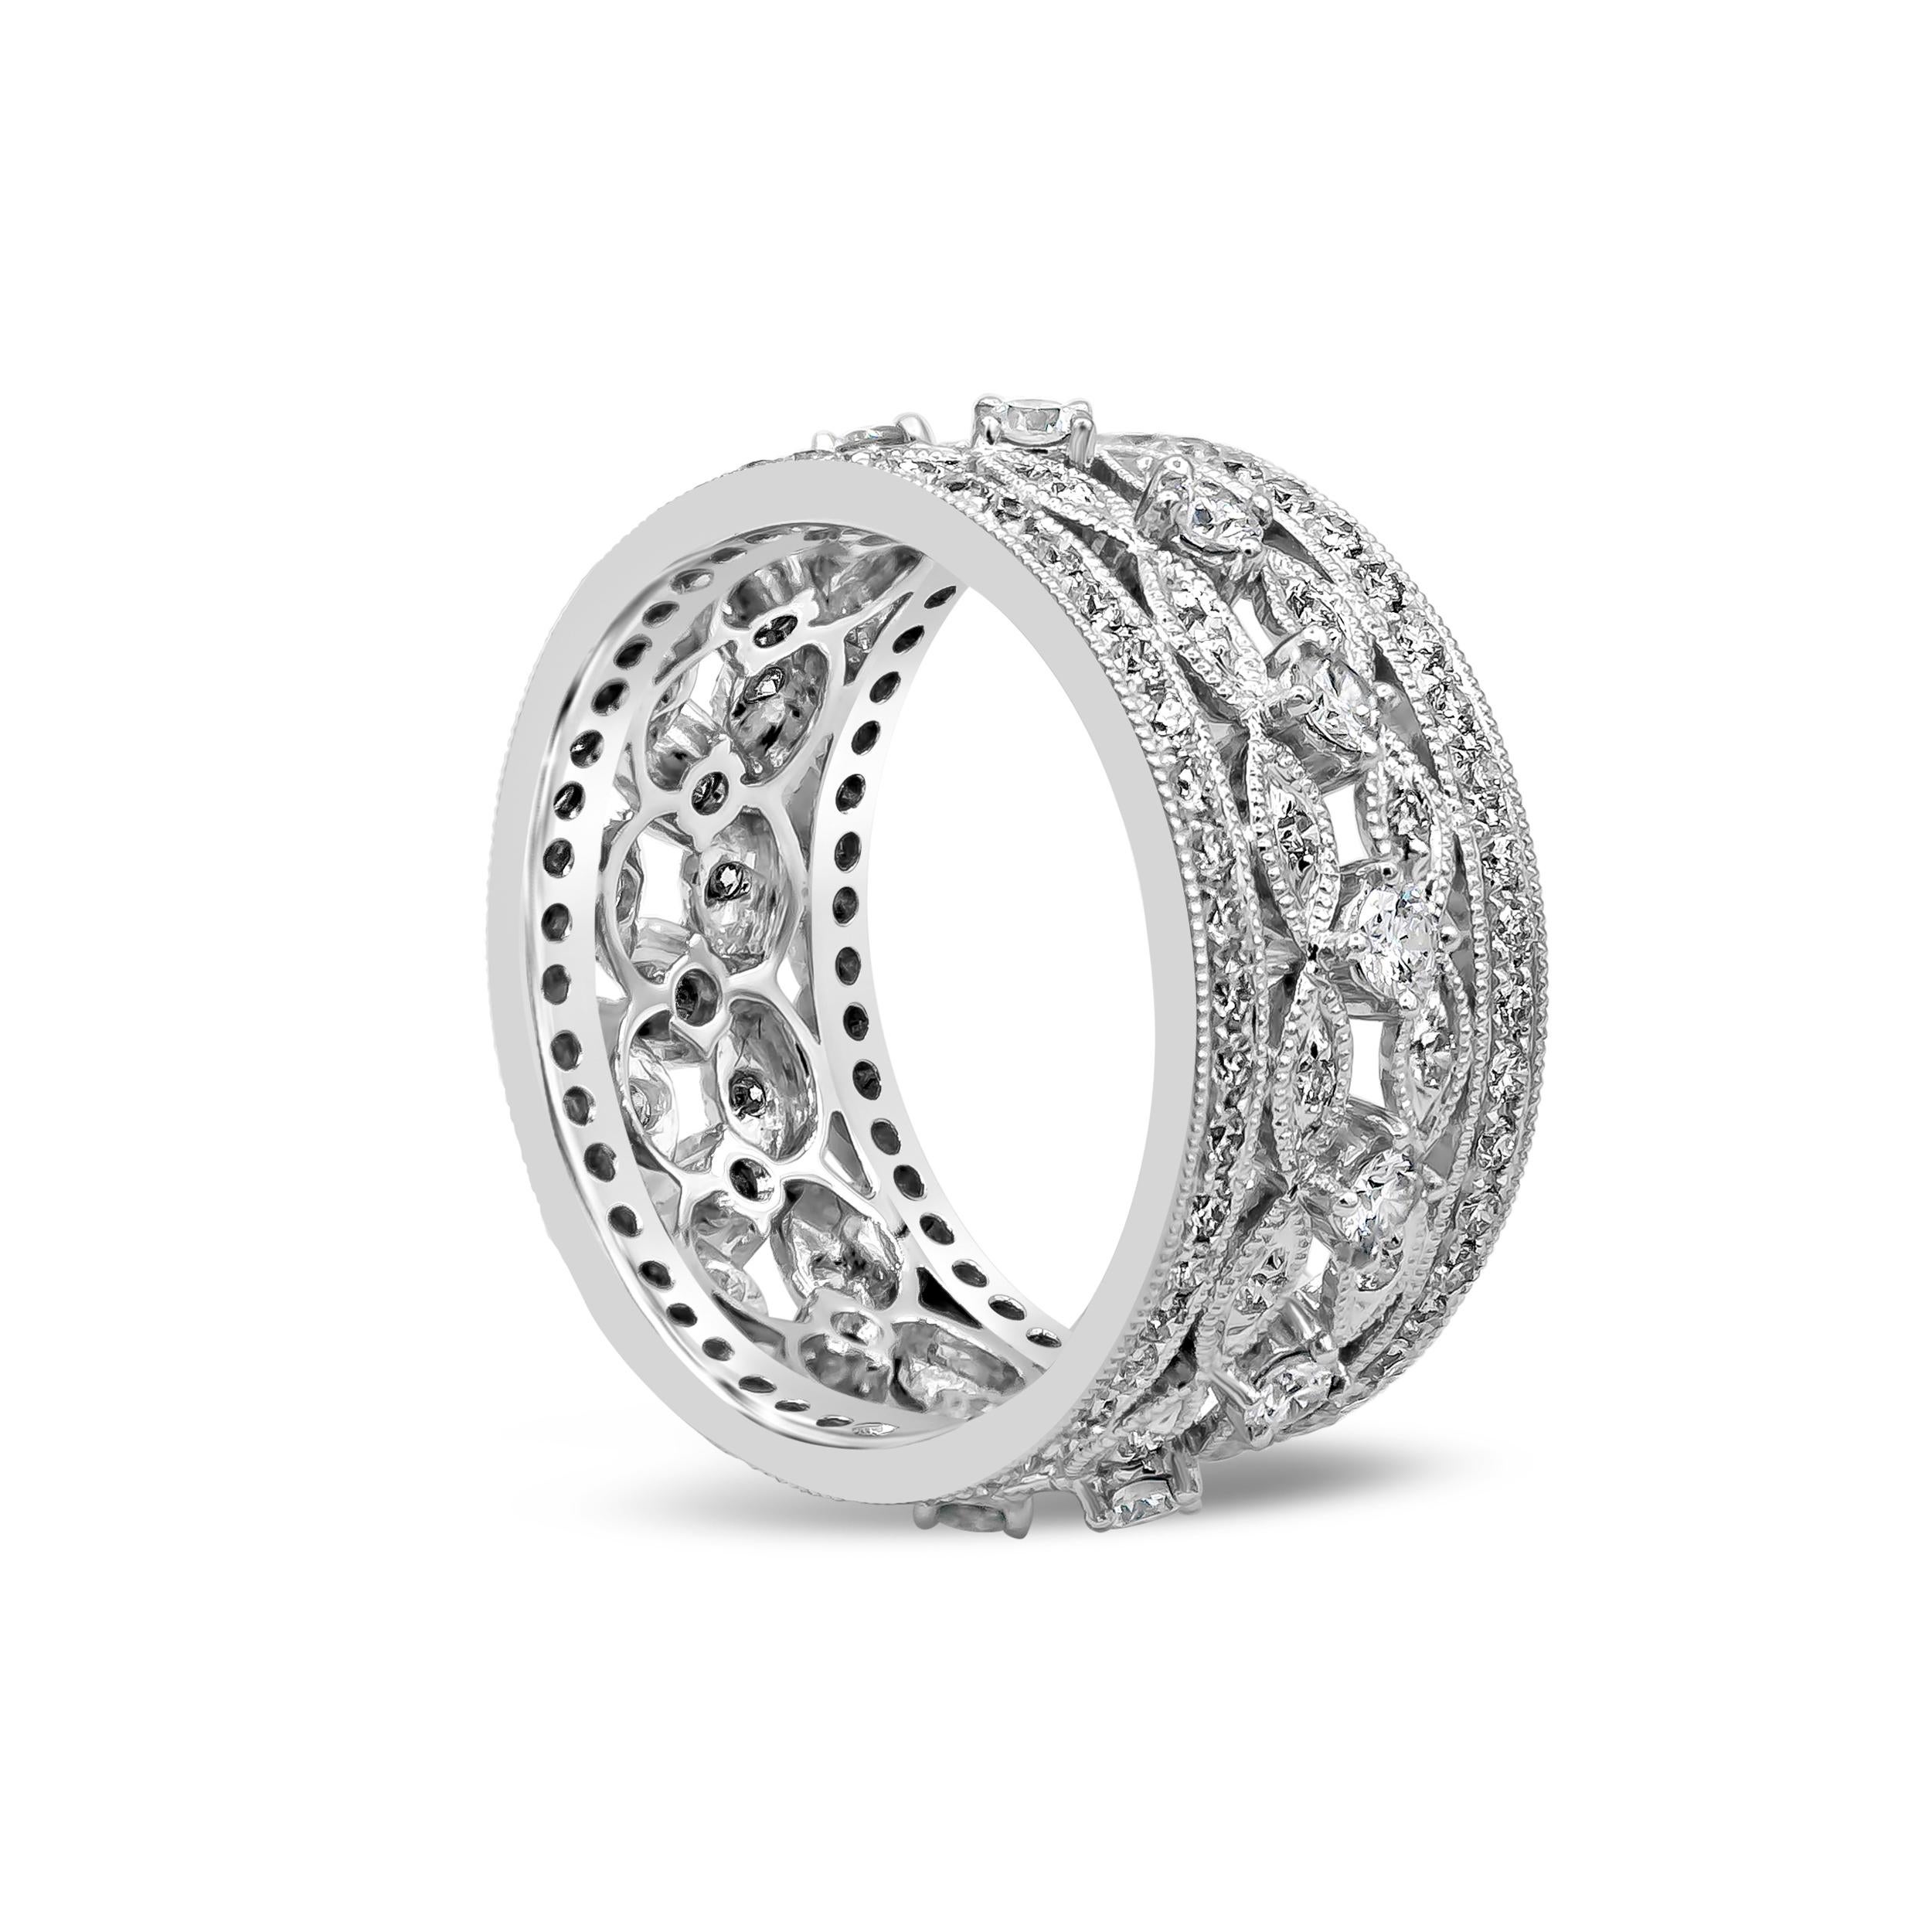 An antique style ring of open work design showcasing 132 round brilliant diamonds, set in an intricate design. Diamonds weigh 1.17 carats total. Size 6.25 US.

Style available in different price ranges. Prices are based on your selection. Please